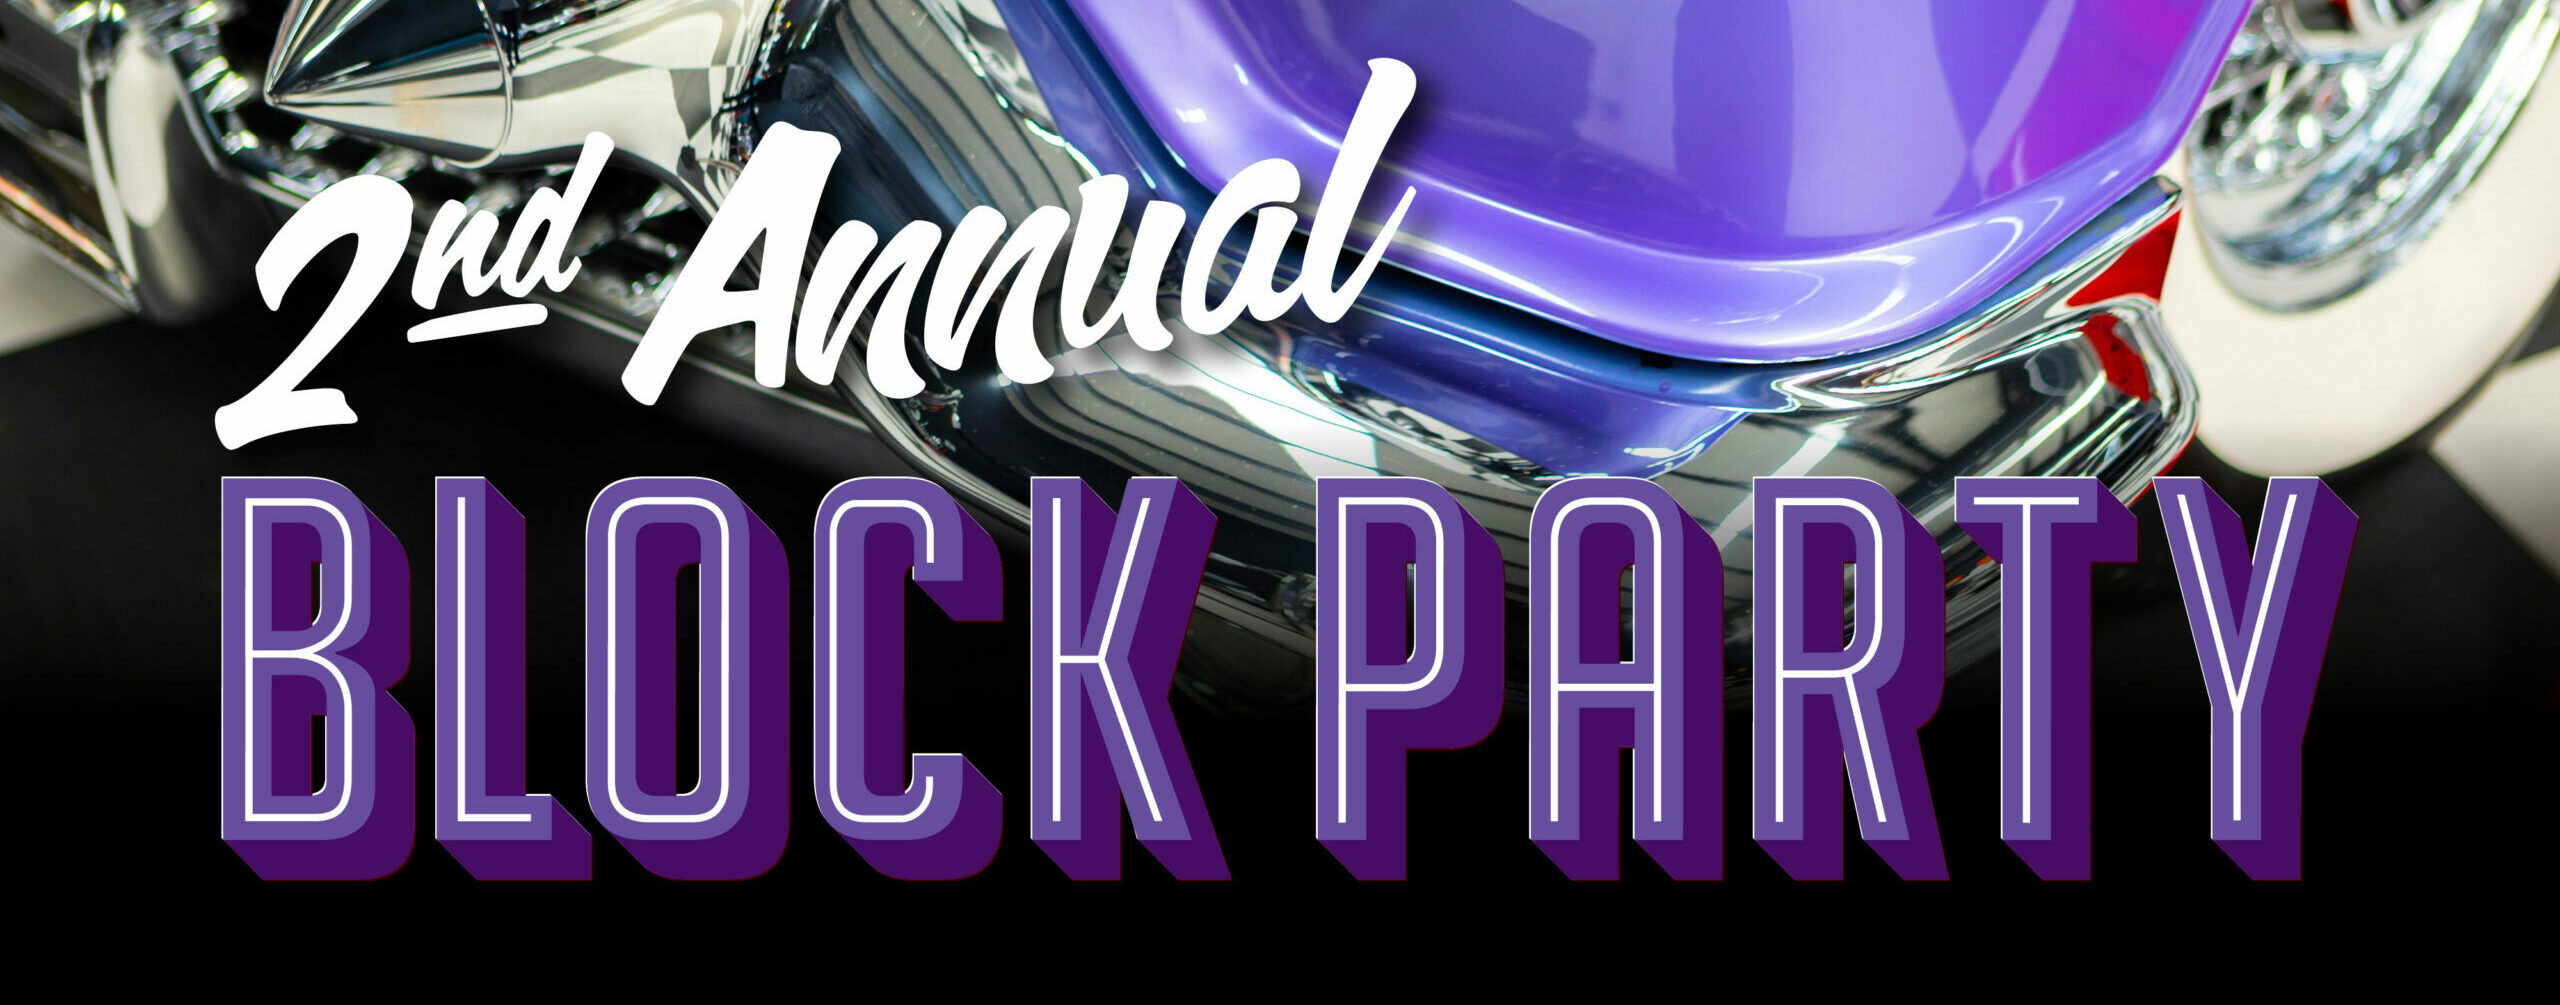 2nd Annual Block Party Benefiting the Alzheimer's Association Banner